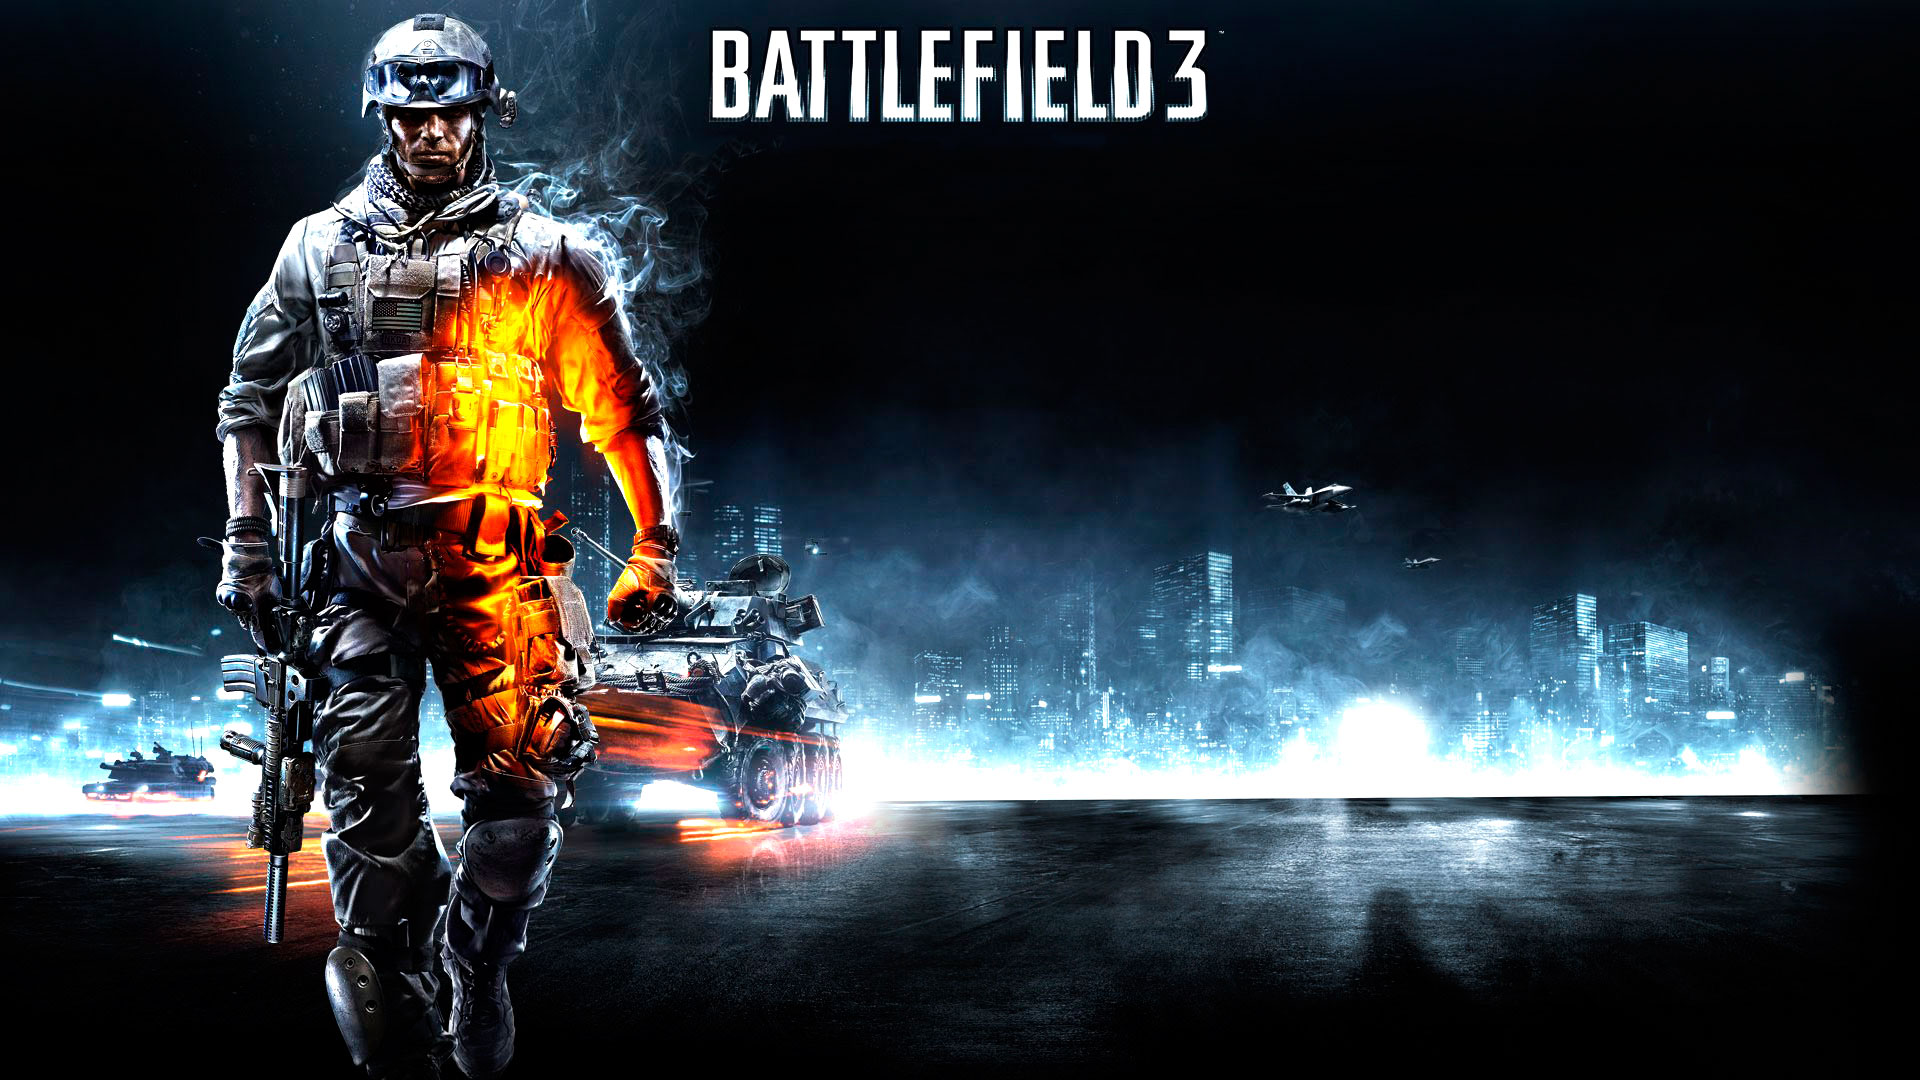 battlefield 3 wallpapers are available for 1080p hd and 720p hd